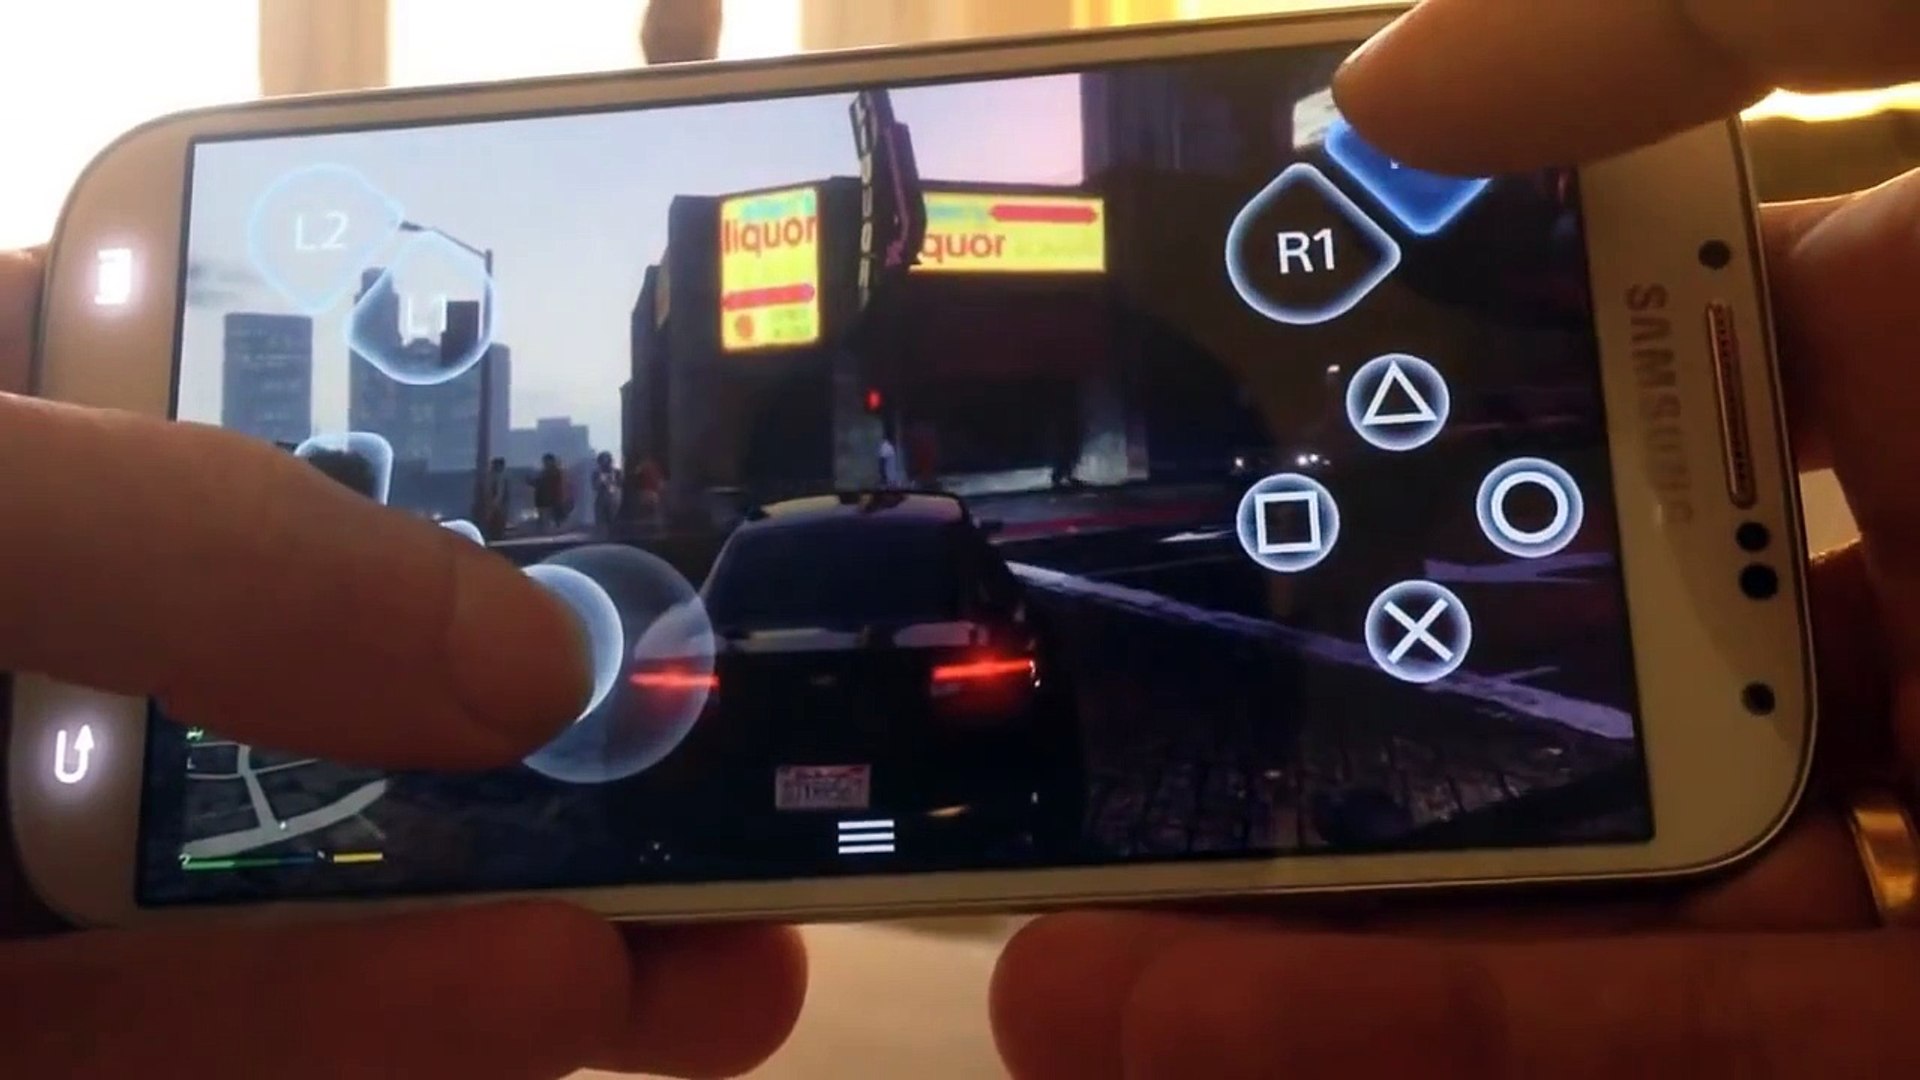 How To Play GTA V On Mobile